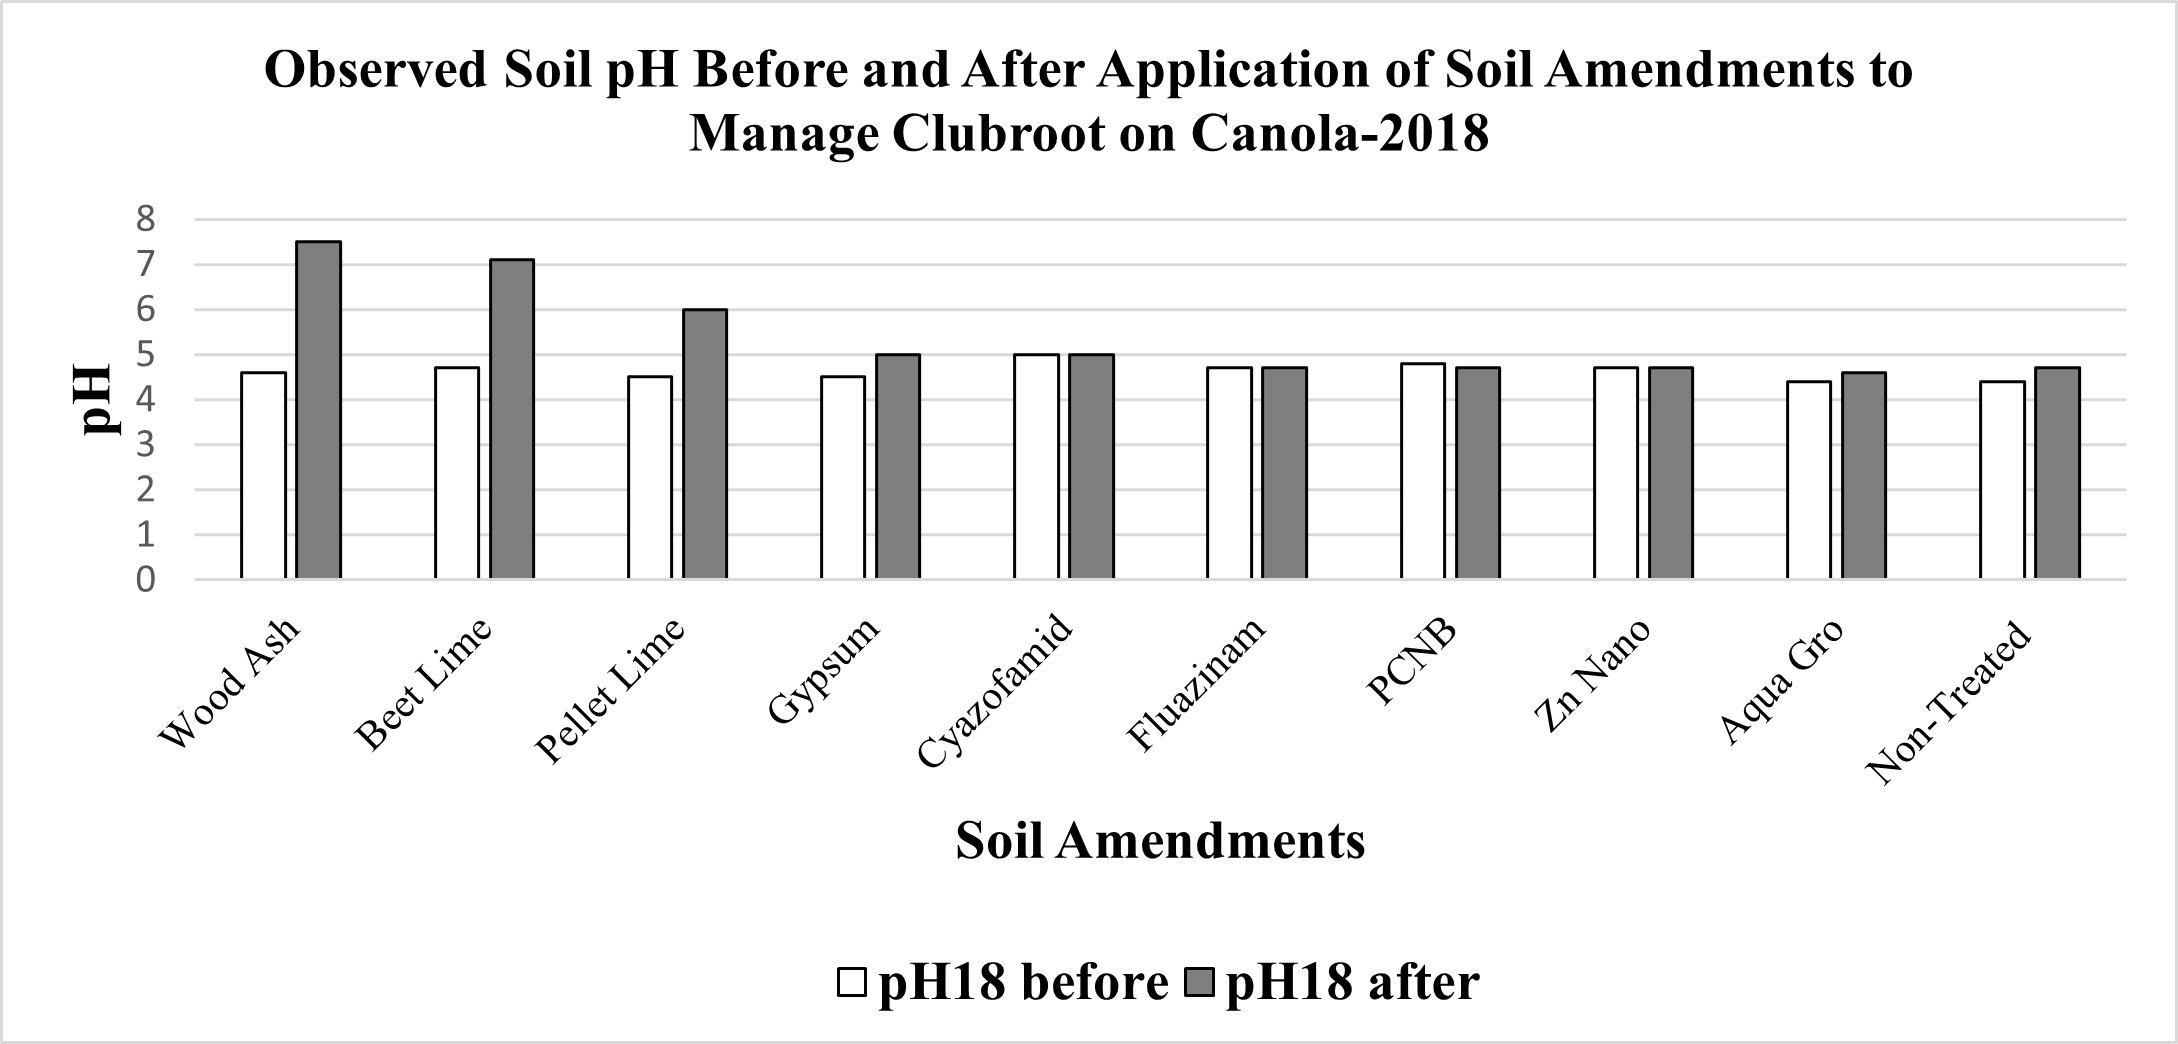 Soil pH before and after application of soil amendments to manage clubroot on canola in 2018.